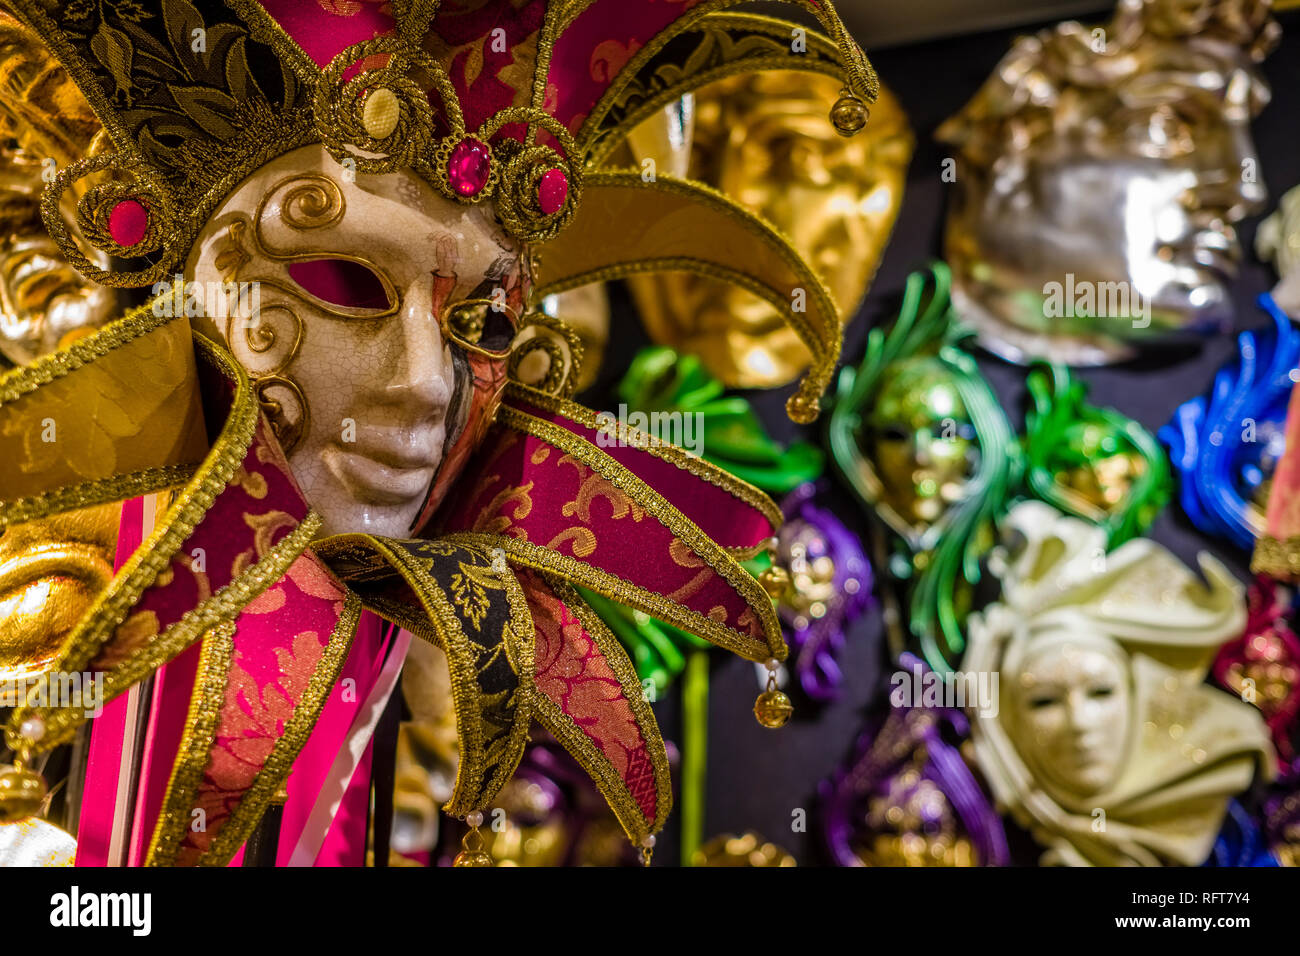 Artful and colorful masks for the Carnival of Venice, Carnevale di Venezia, are displayed in a shop for sale Stock Photo